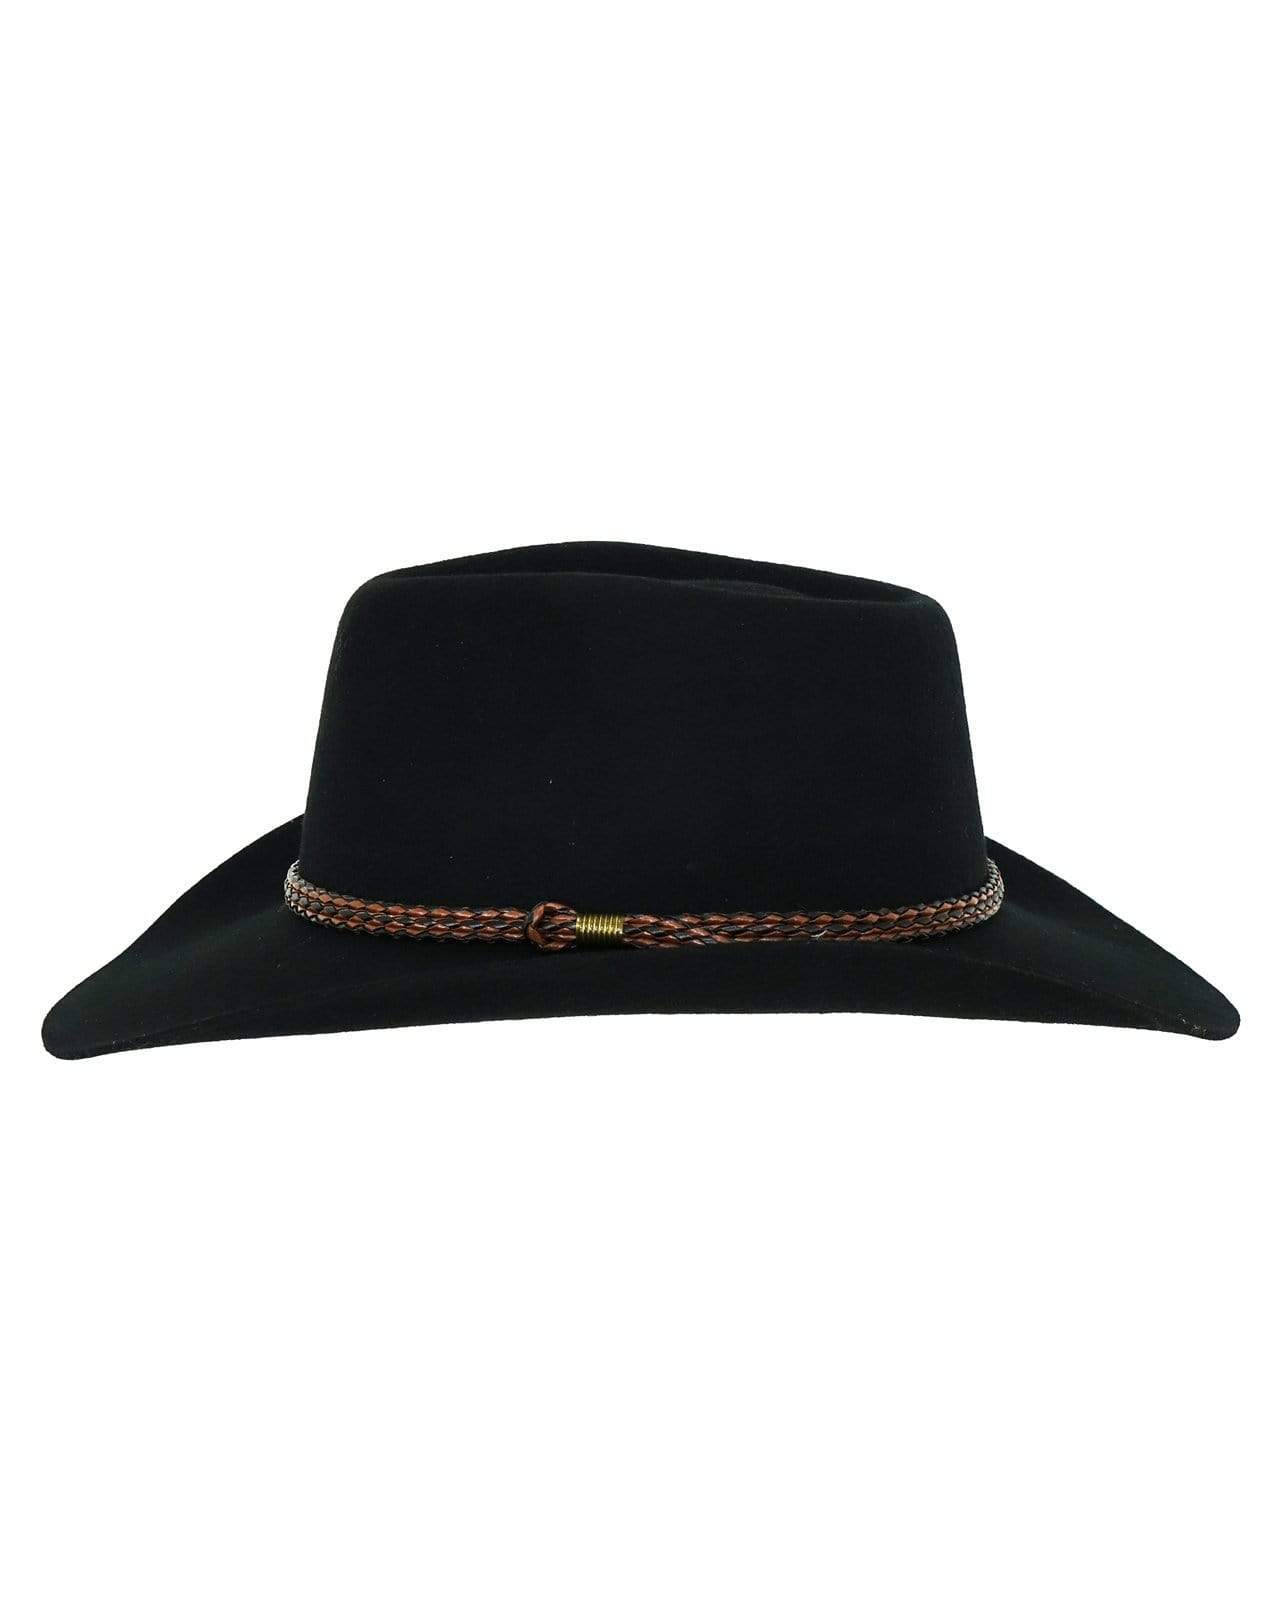 Outback Trading Company Forbes Hats